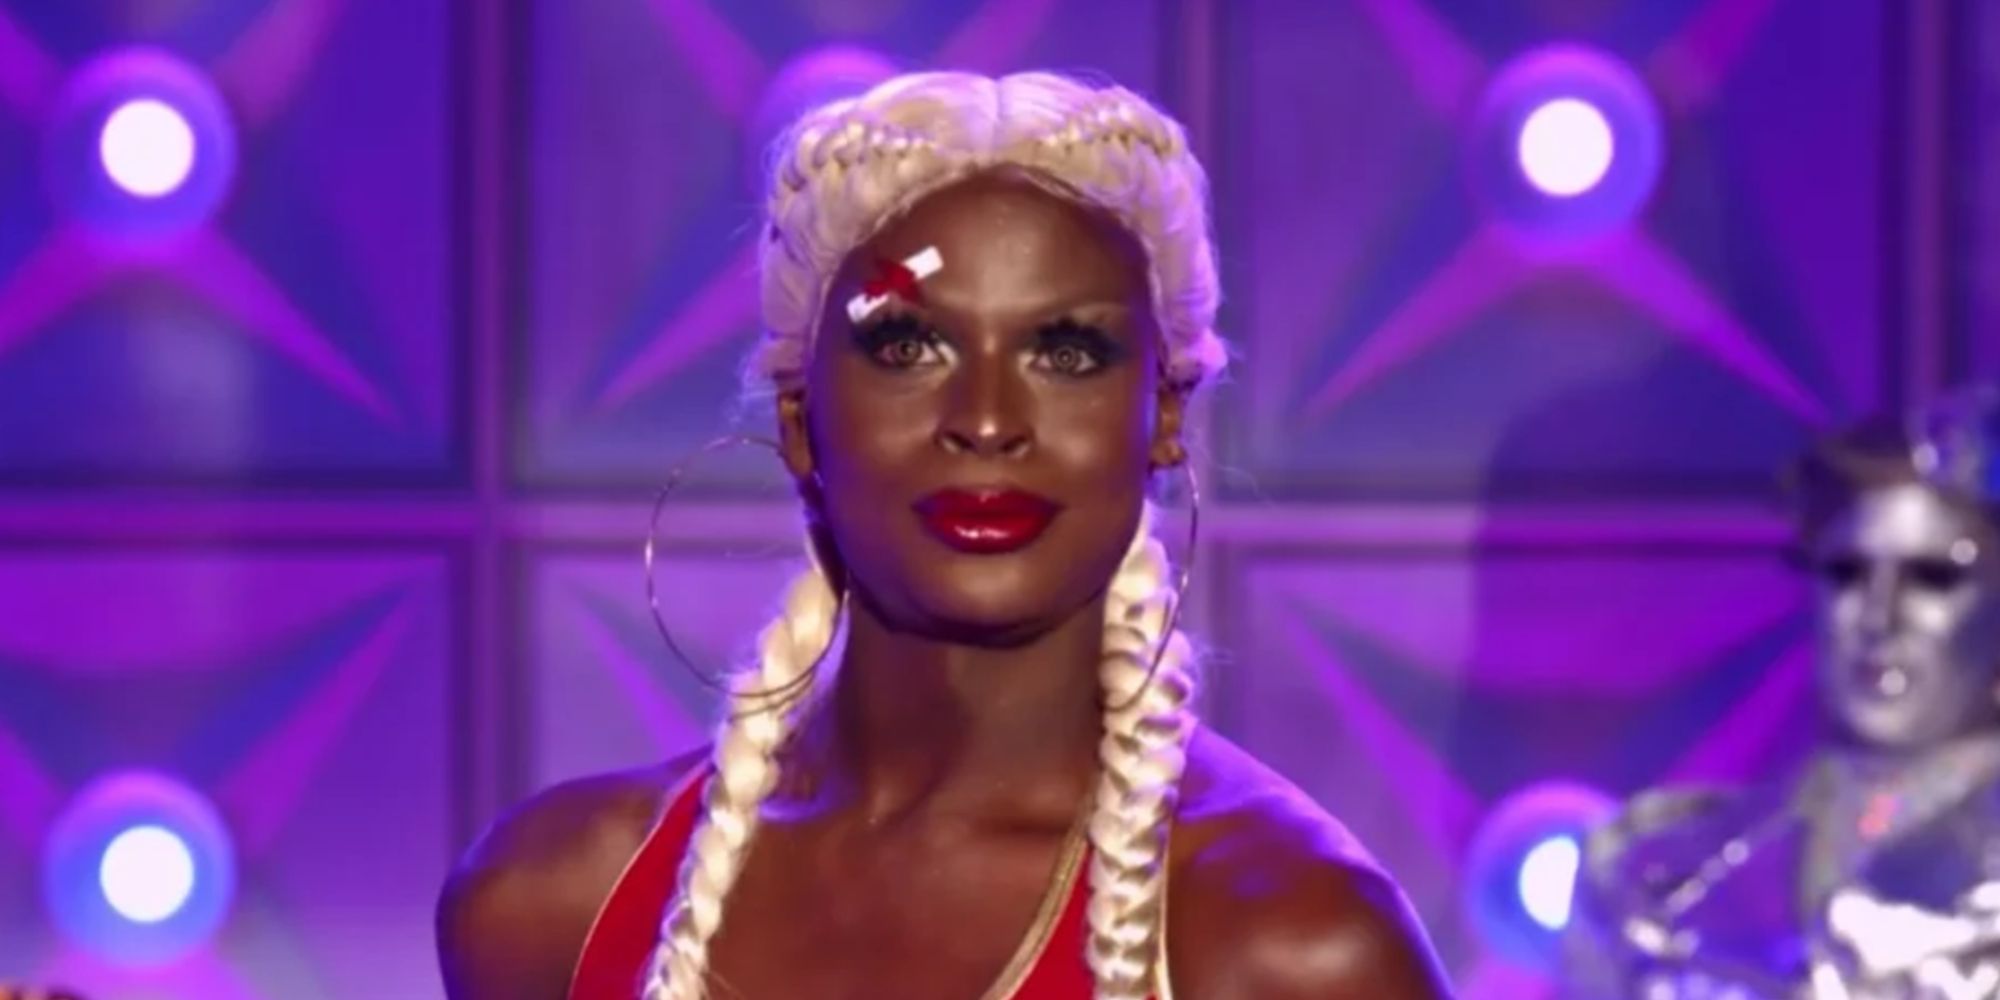 Symone smiling in a white wig on the main stage of RuPaul's Drag Race season 13